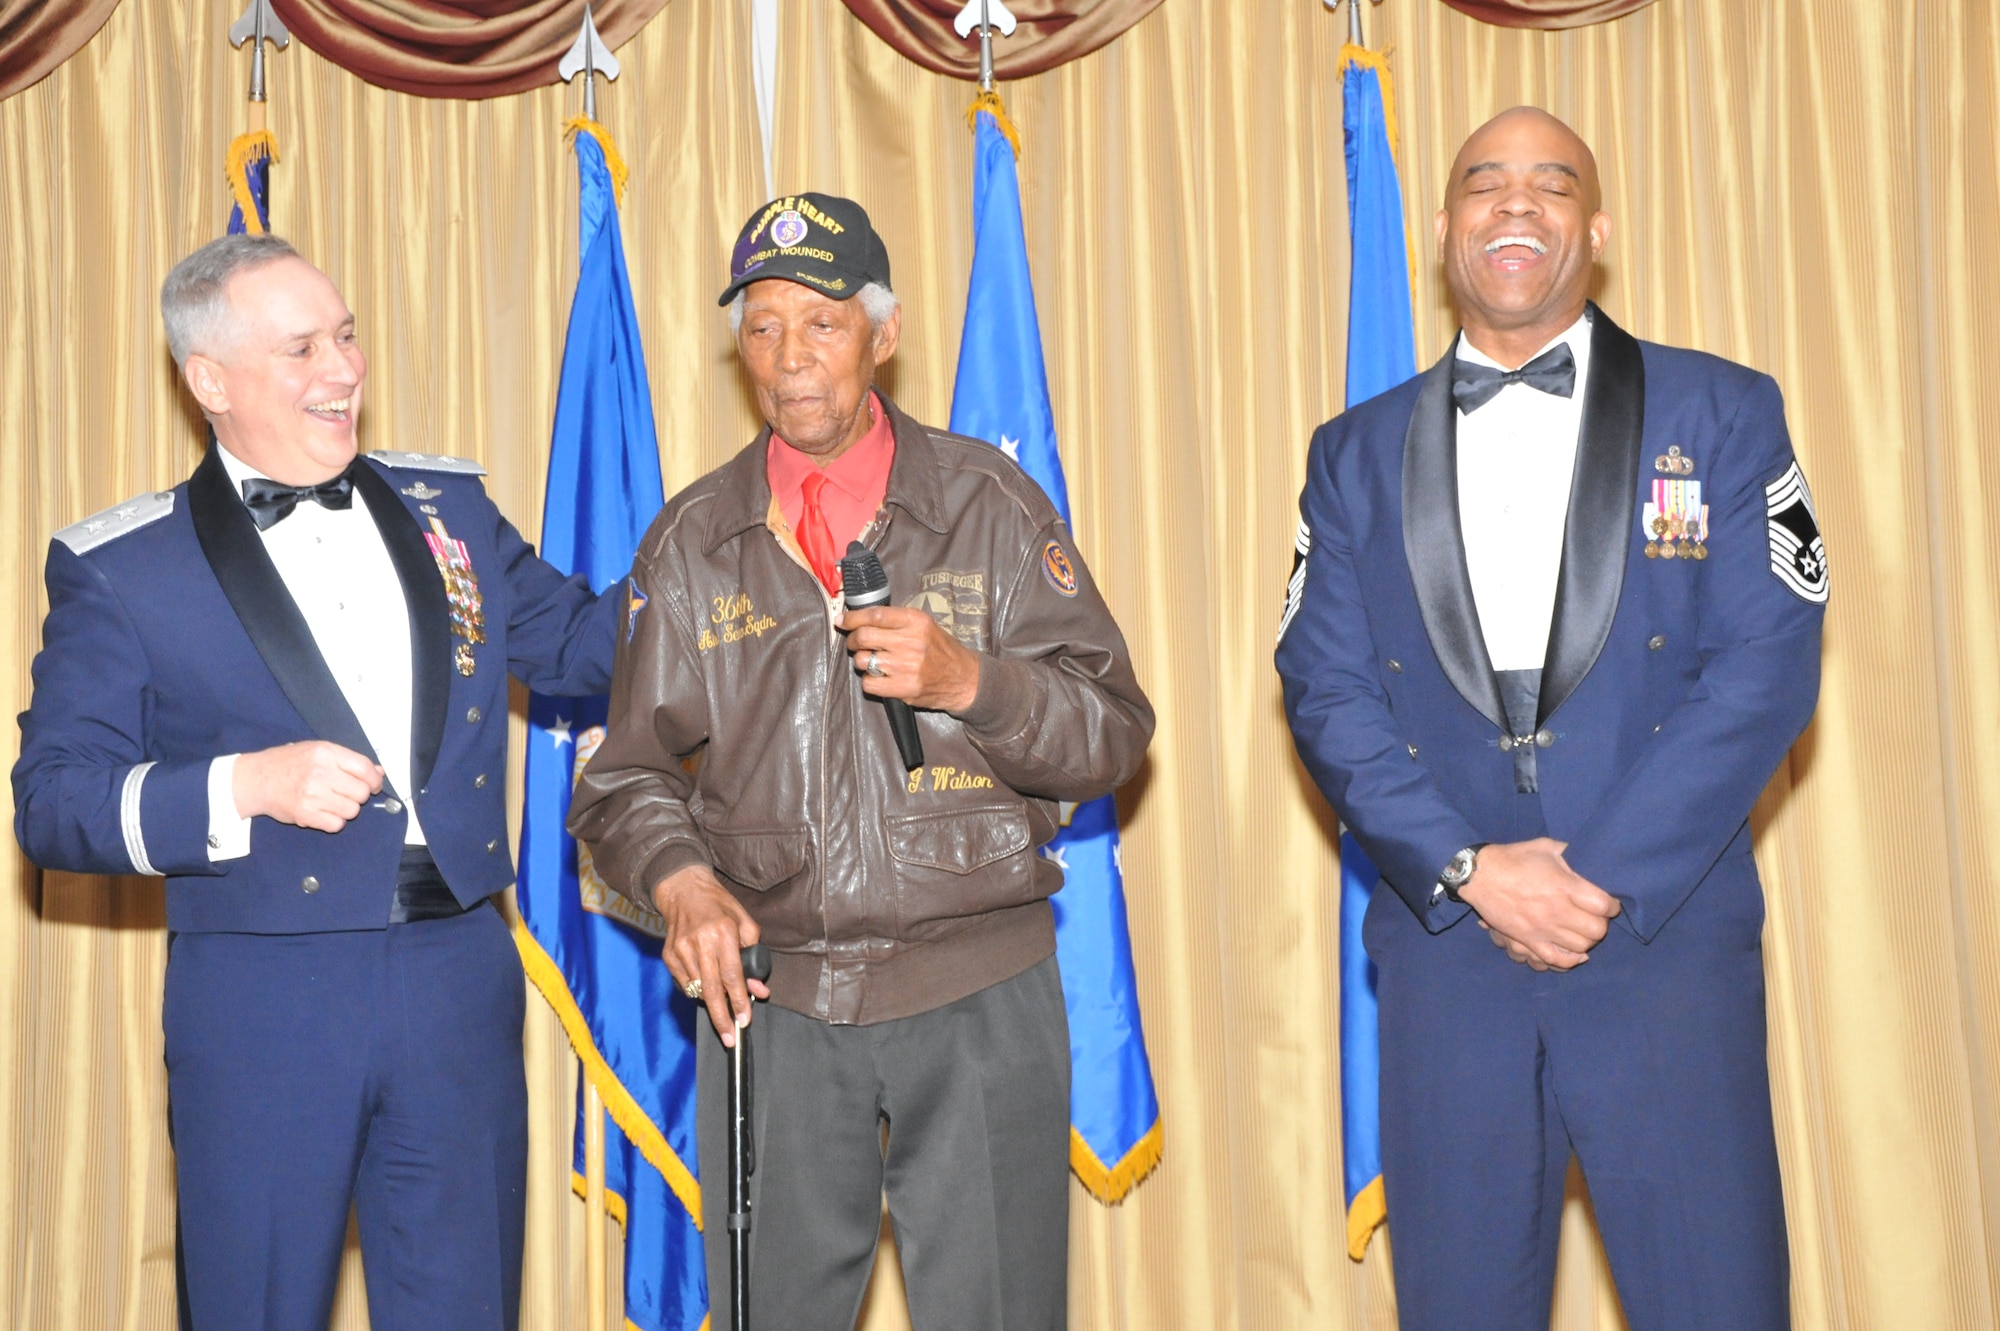 Retired Tech. Sgt. George Watson Sr., an original Tuskegee Airmen, shares a laugh on stage with Maj. Gen. Rick Martin, U.S. Air Force Expeditionary Center commander, and Chief Master Sgt. Vincent Burrell, U.S. Air Force Expeditionary Operations School command chief, at Joint Base McGuire-Dix-Lakehurst, N.J., Feb. 4, 2015. Watson was the guest speaker at the USAF EC Annual Awards Ceremony. (US Air Force photo/ Brad Camara)